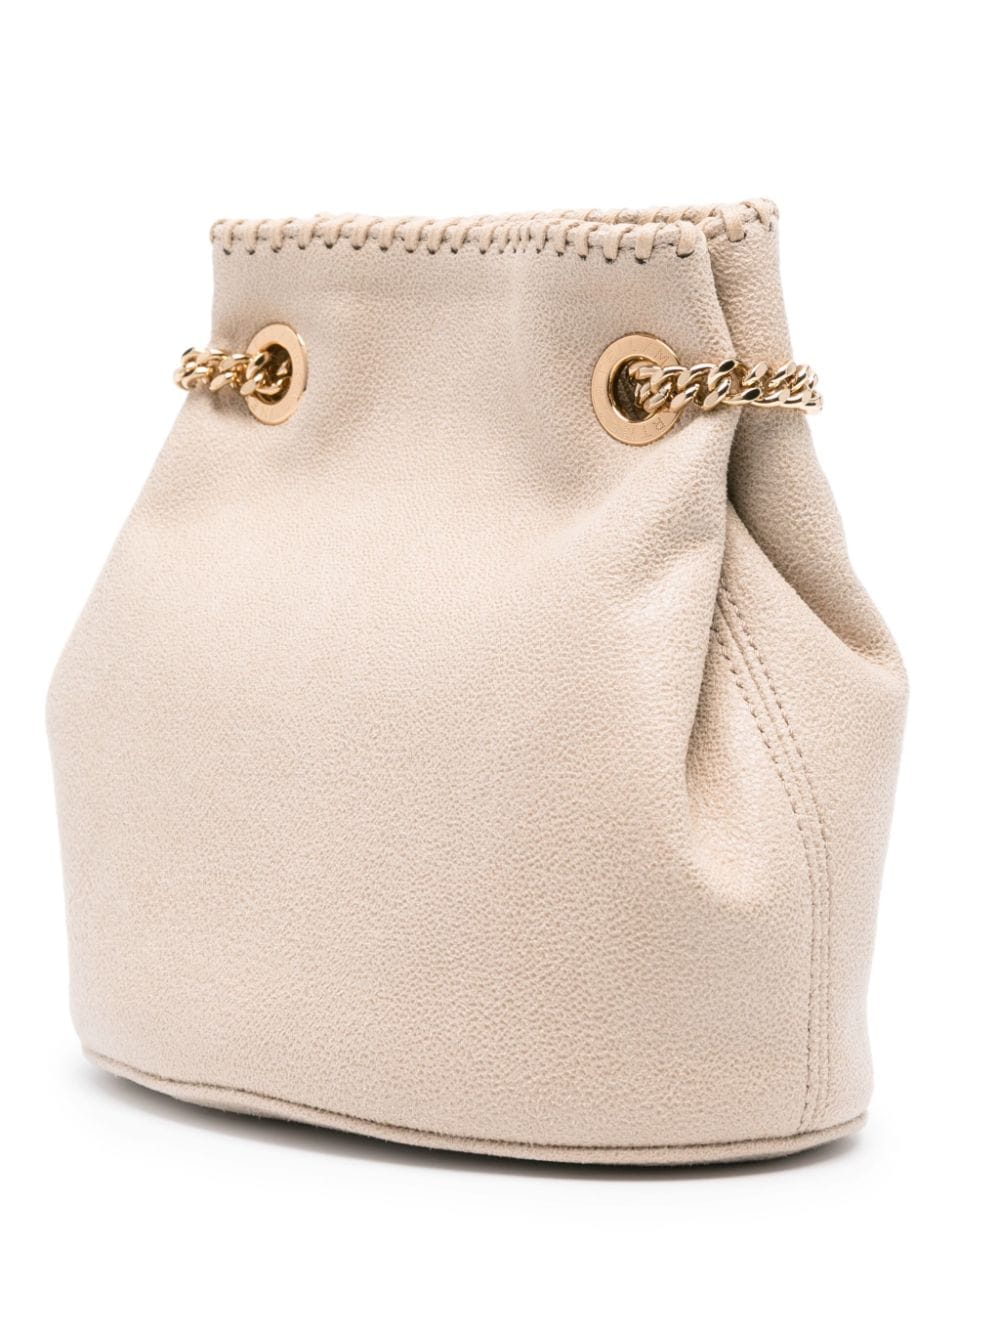 STELLA MCCARTNEY Introducing the Luxe Faux Leather Falabella Bucket Handbag in Sand Beige for Women